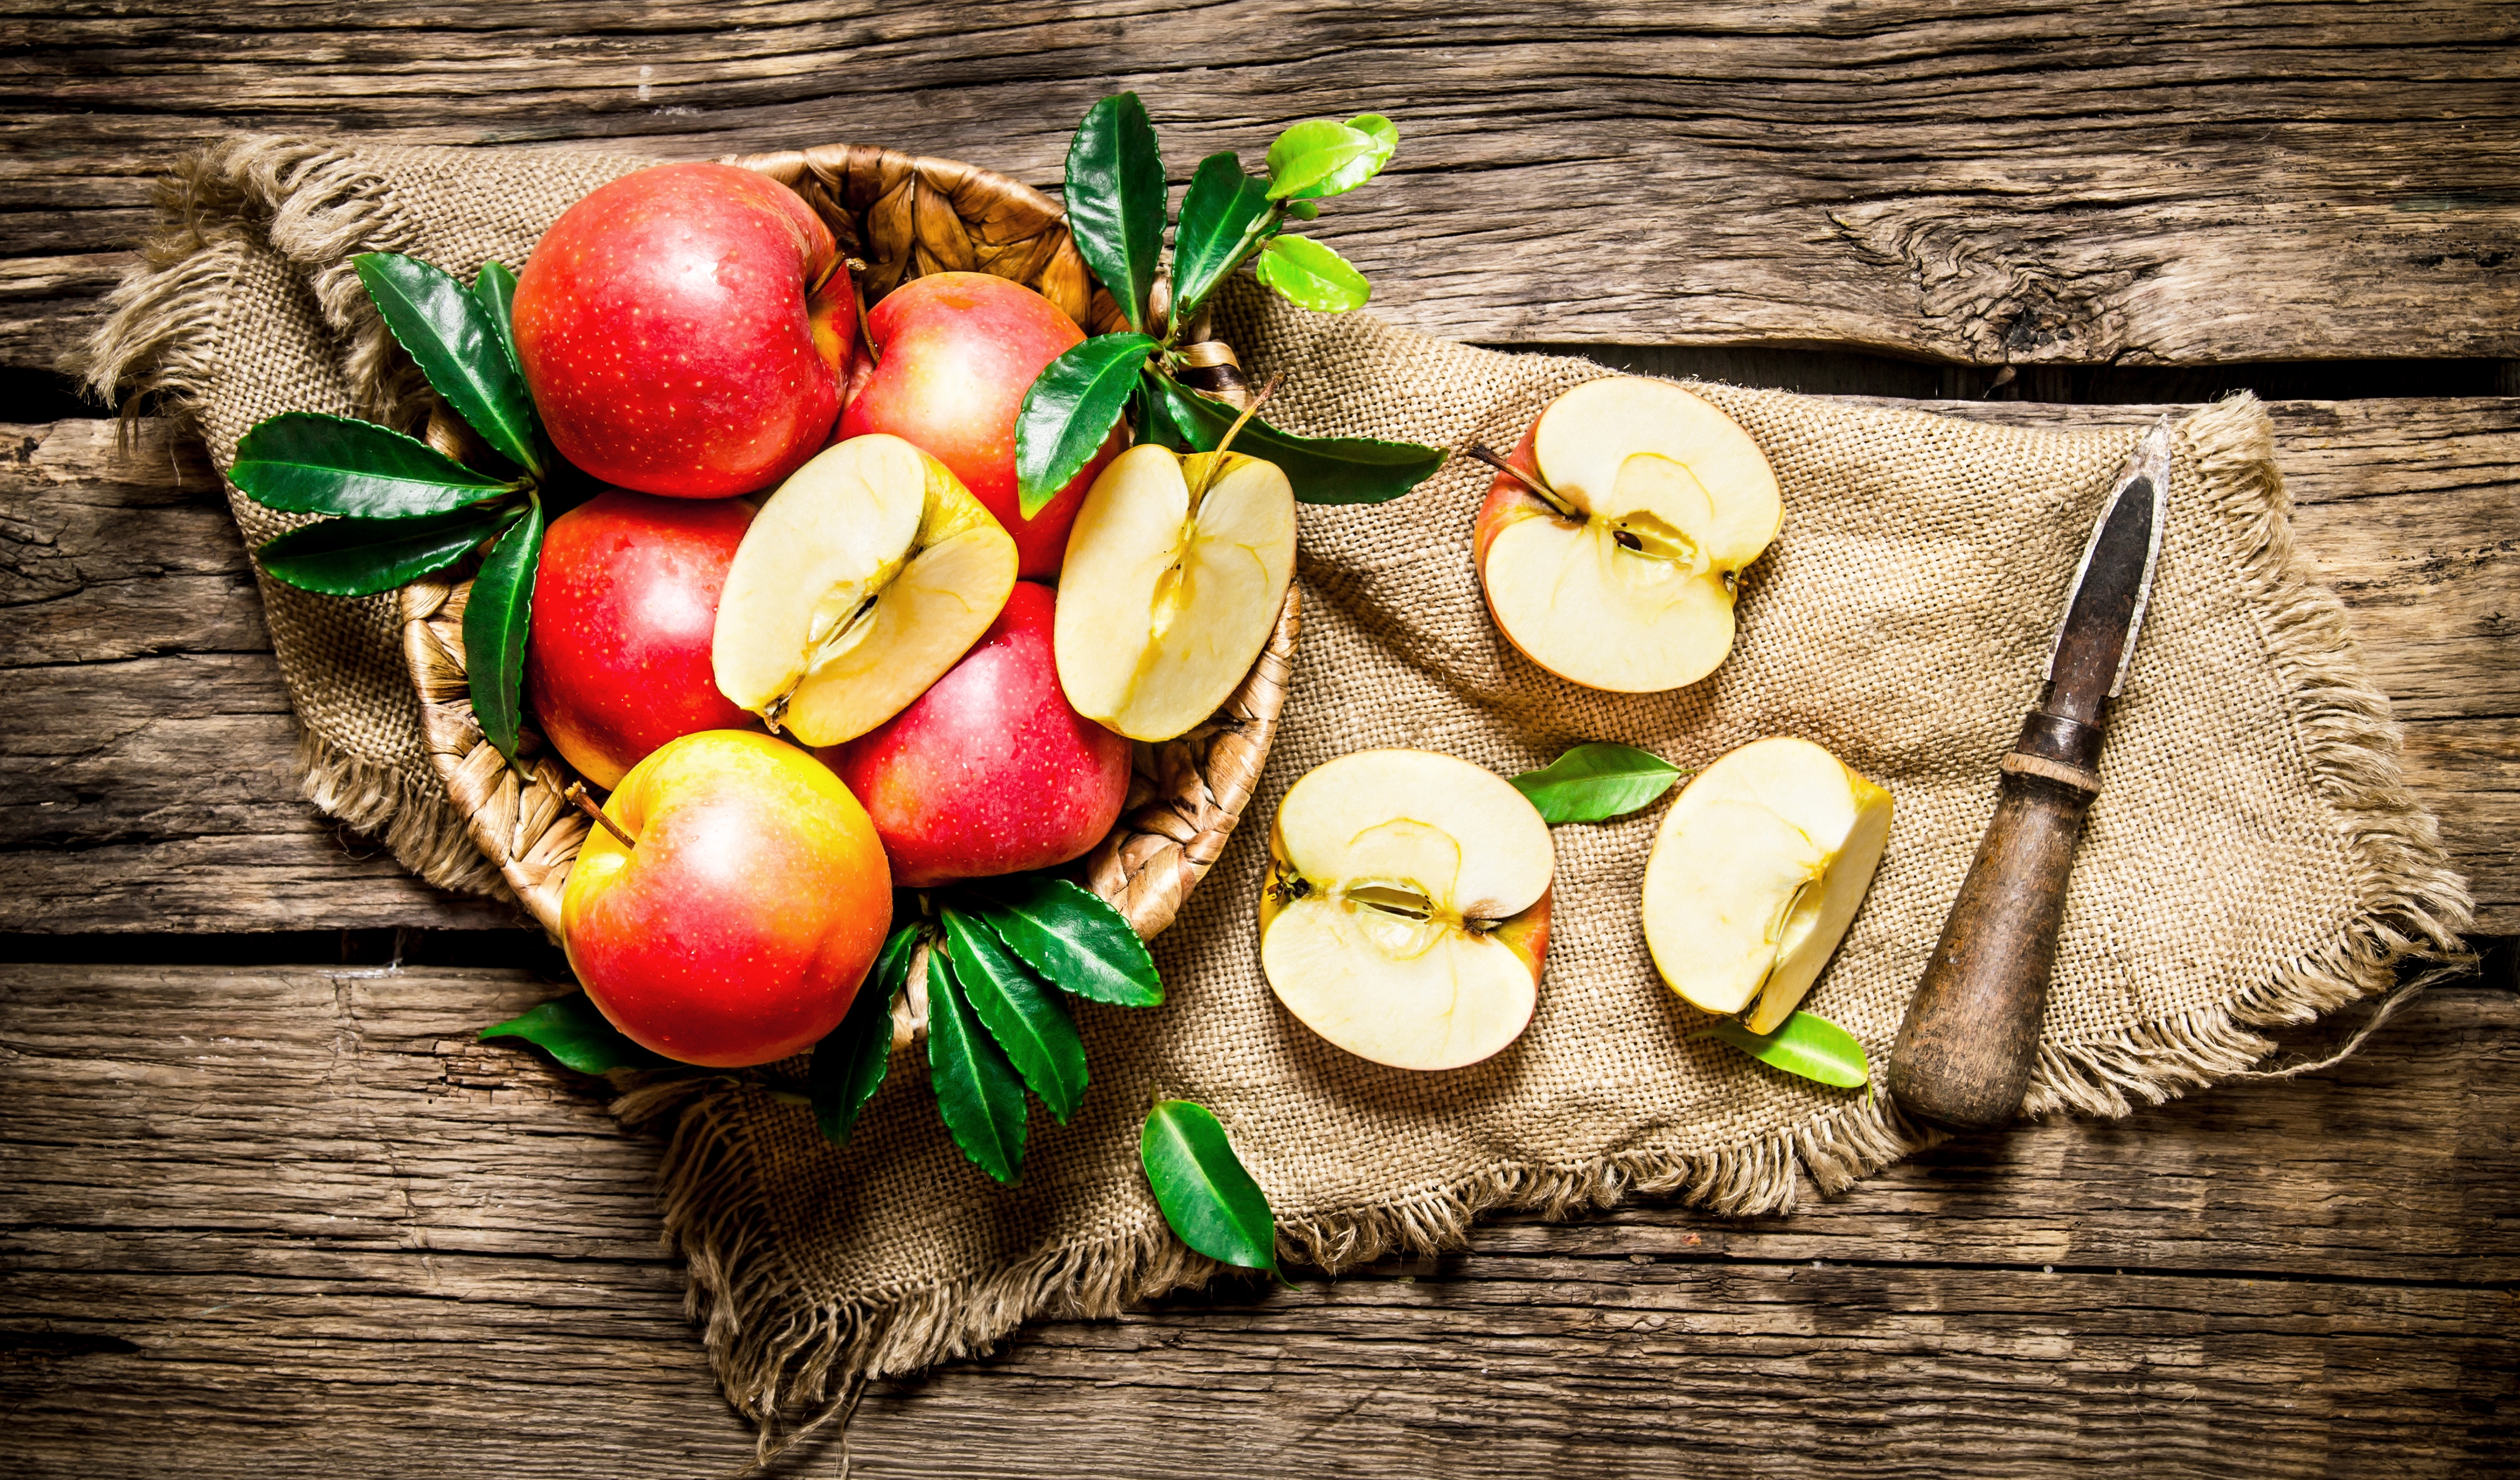 Wallpapers apple wooden table fruits on the desktop